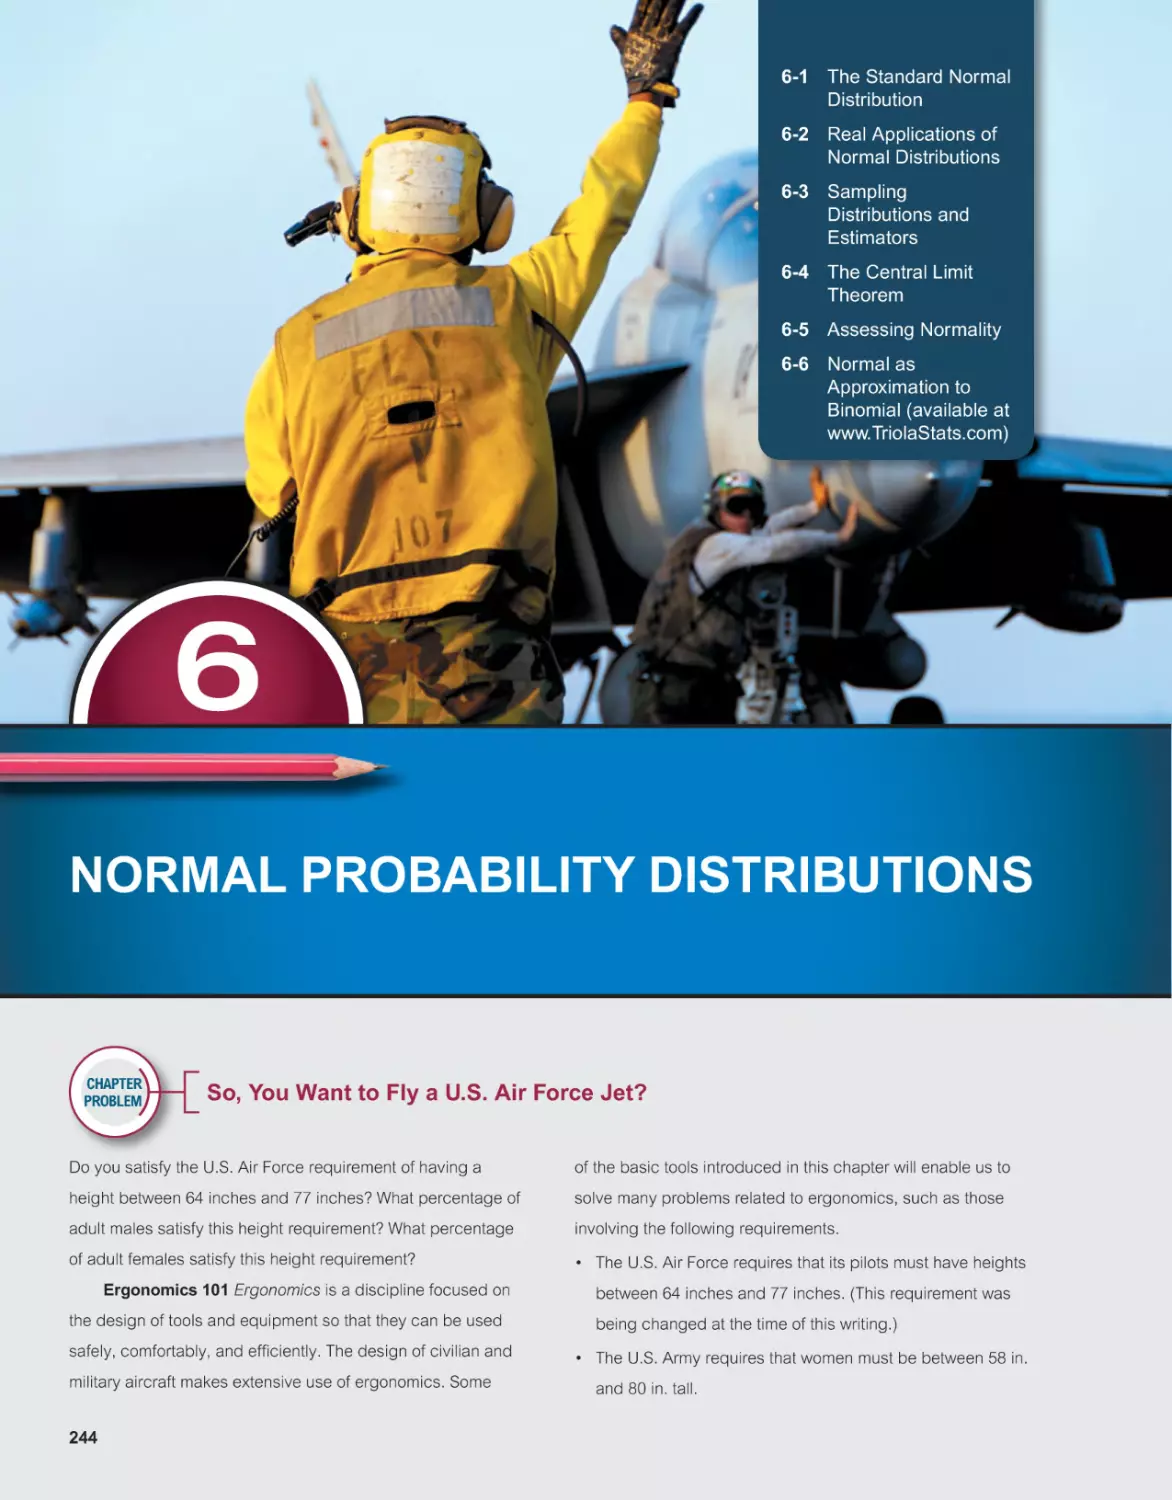 6 NORMAL PROBABILITY DISTRIBUTIONS